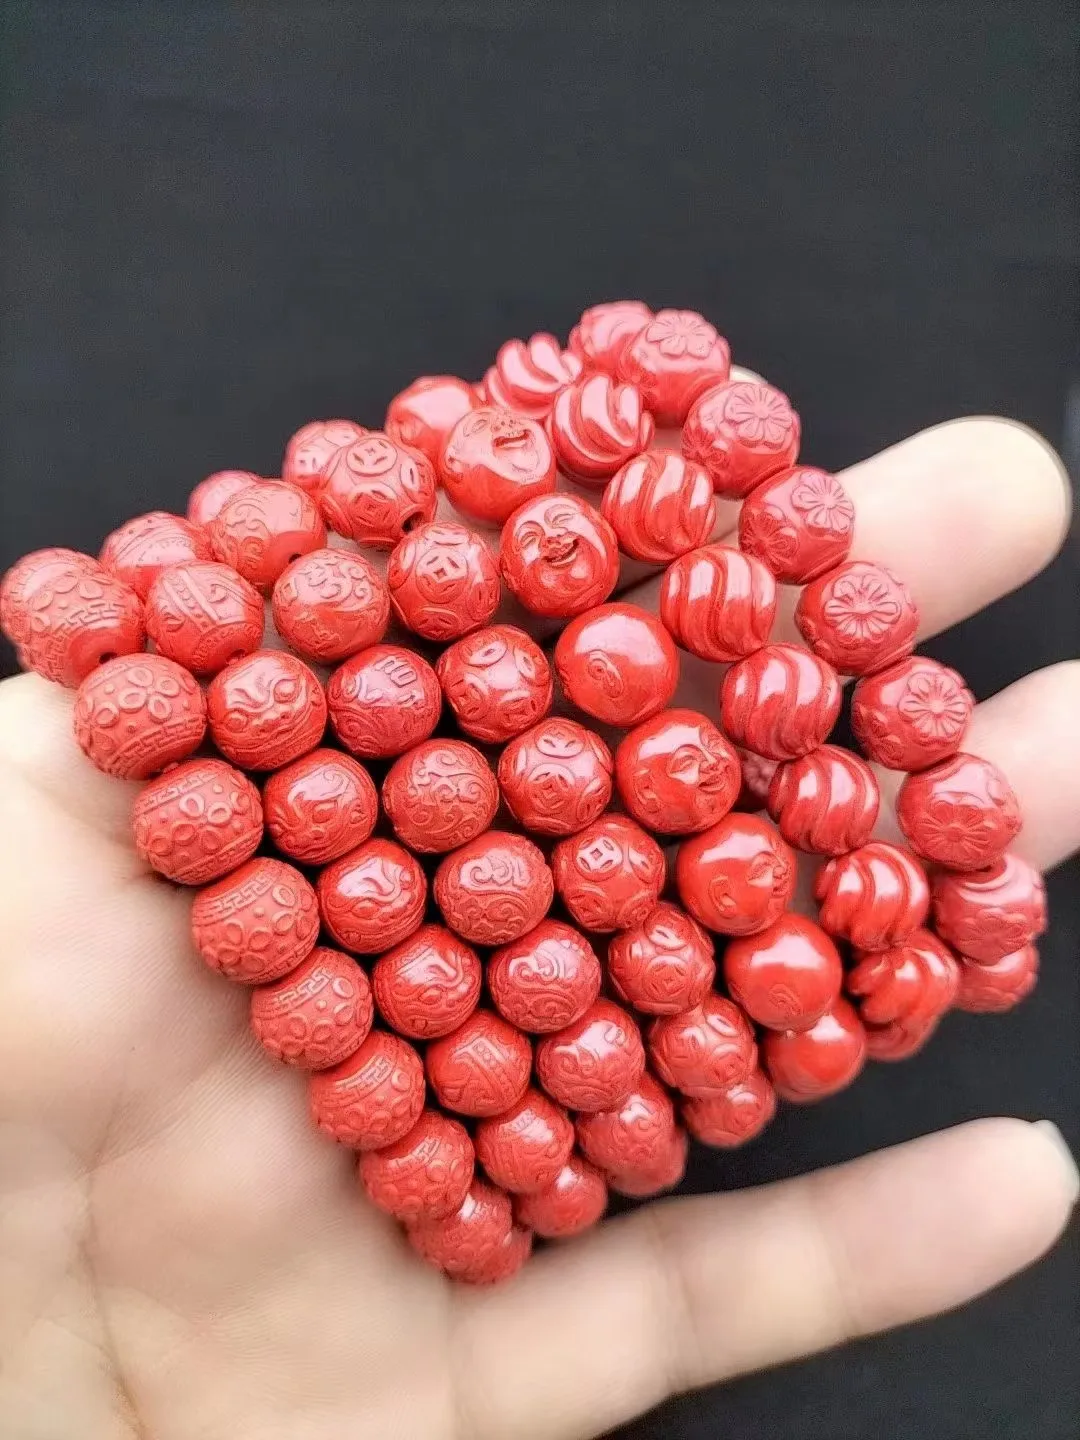 Natural 100% real red Cinnabar Jade carved  A variety of treasures beads bracelets for couples woman men Gift with jade bracelet